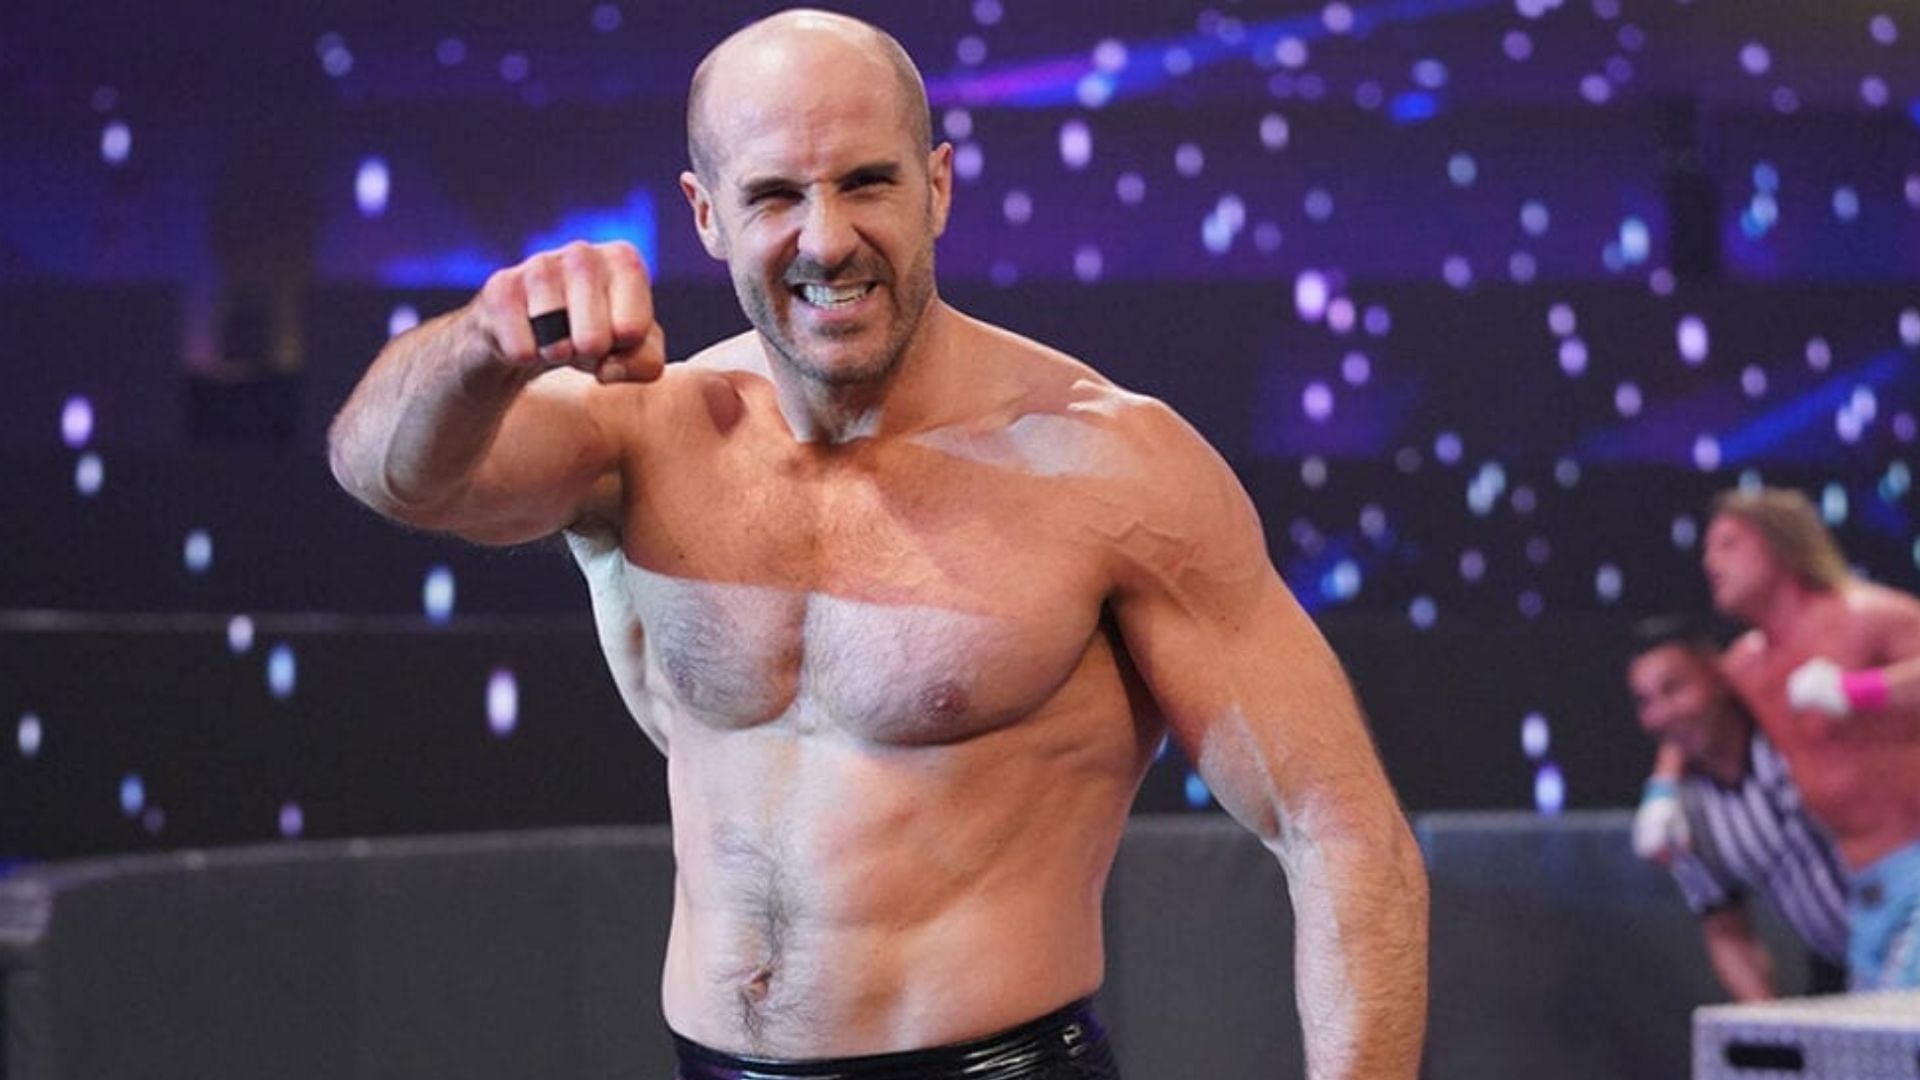 Cesaro is a free agent after leaving WWE earlier this year